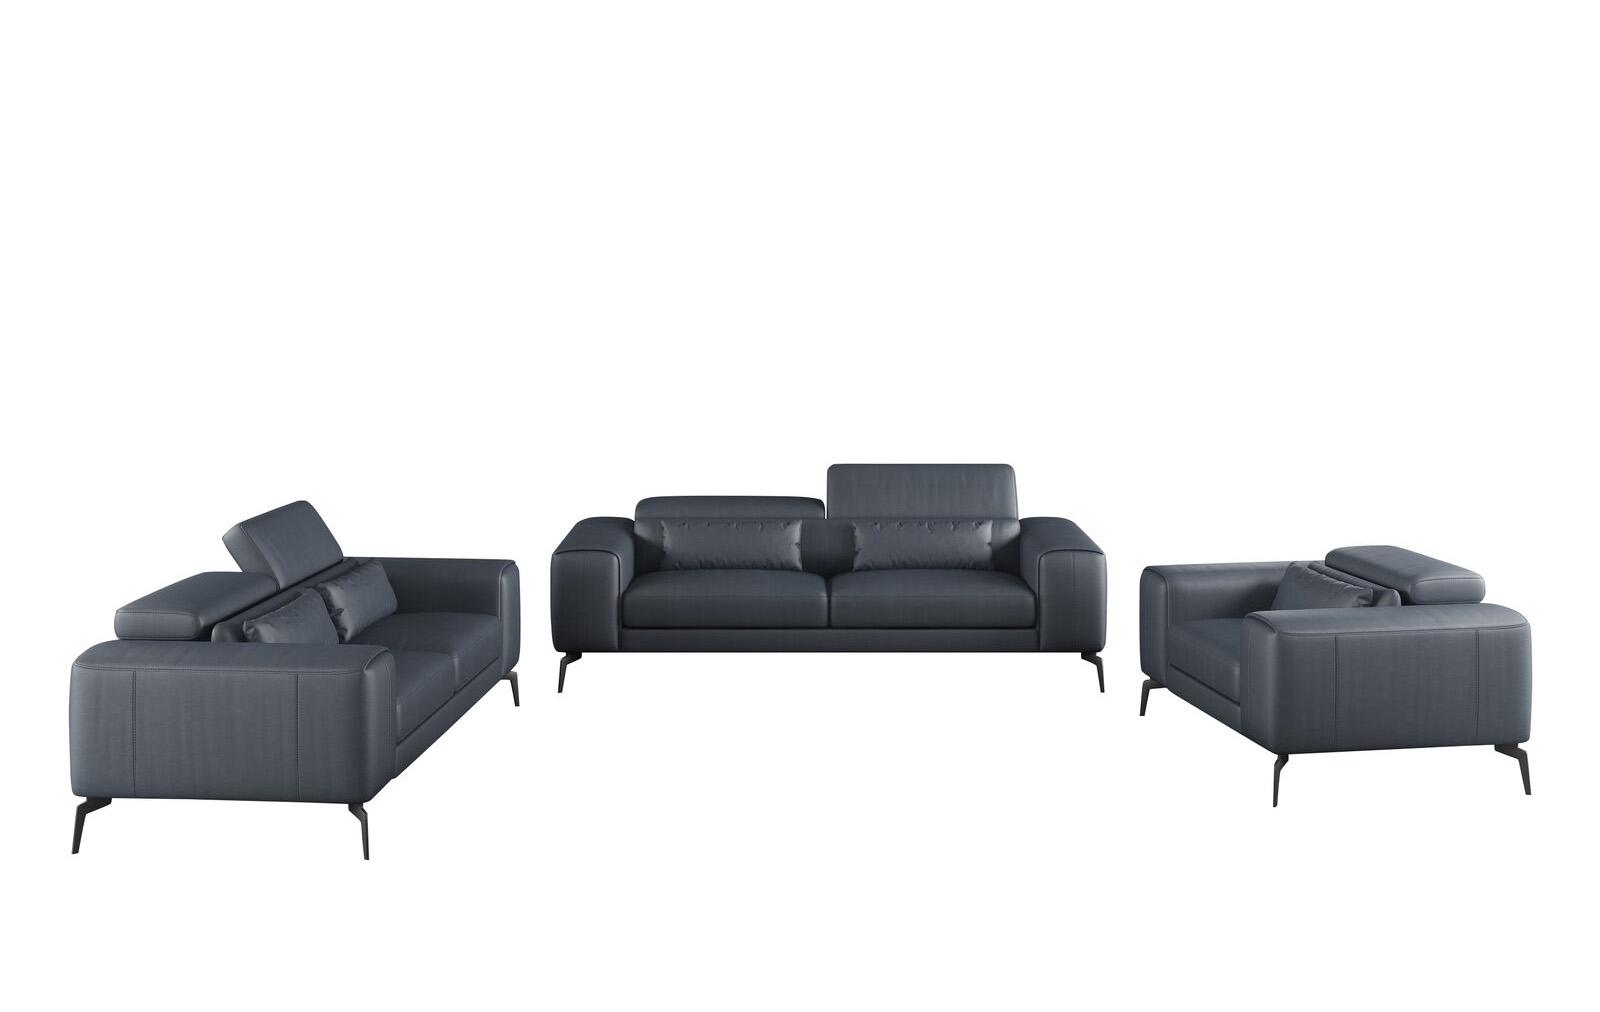 Contemporary, Modern Sofa Set CAVOUR EF-12550-Set-3 in Smoke, Gray Leather